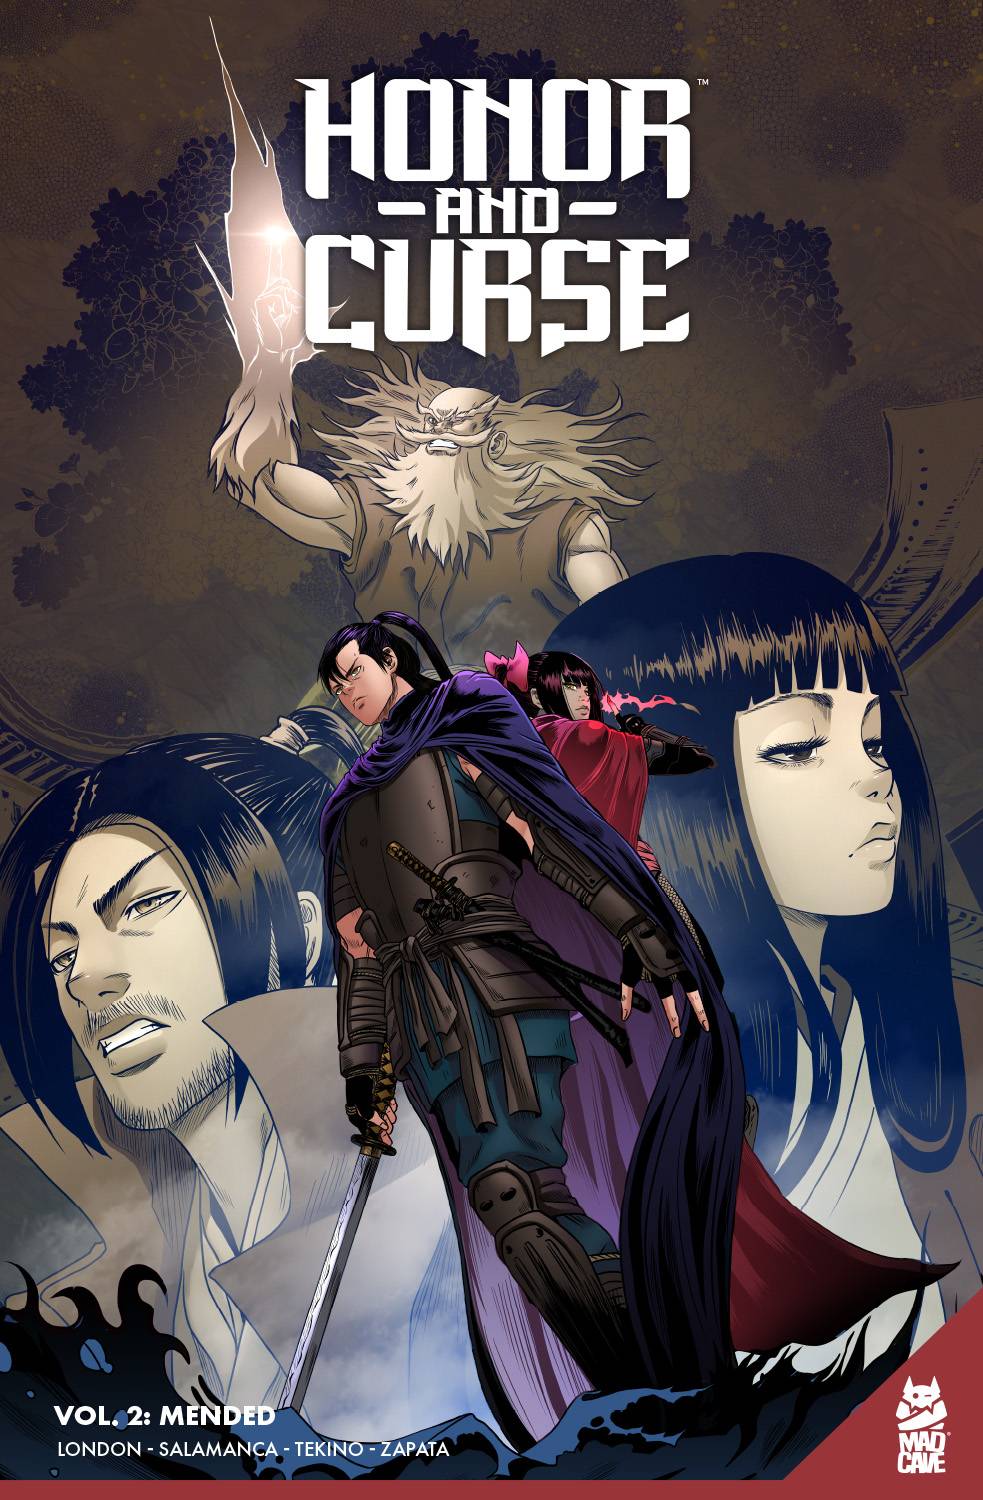 HONOR AND CURSE TP VOL 02 MENDED